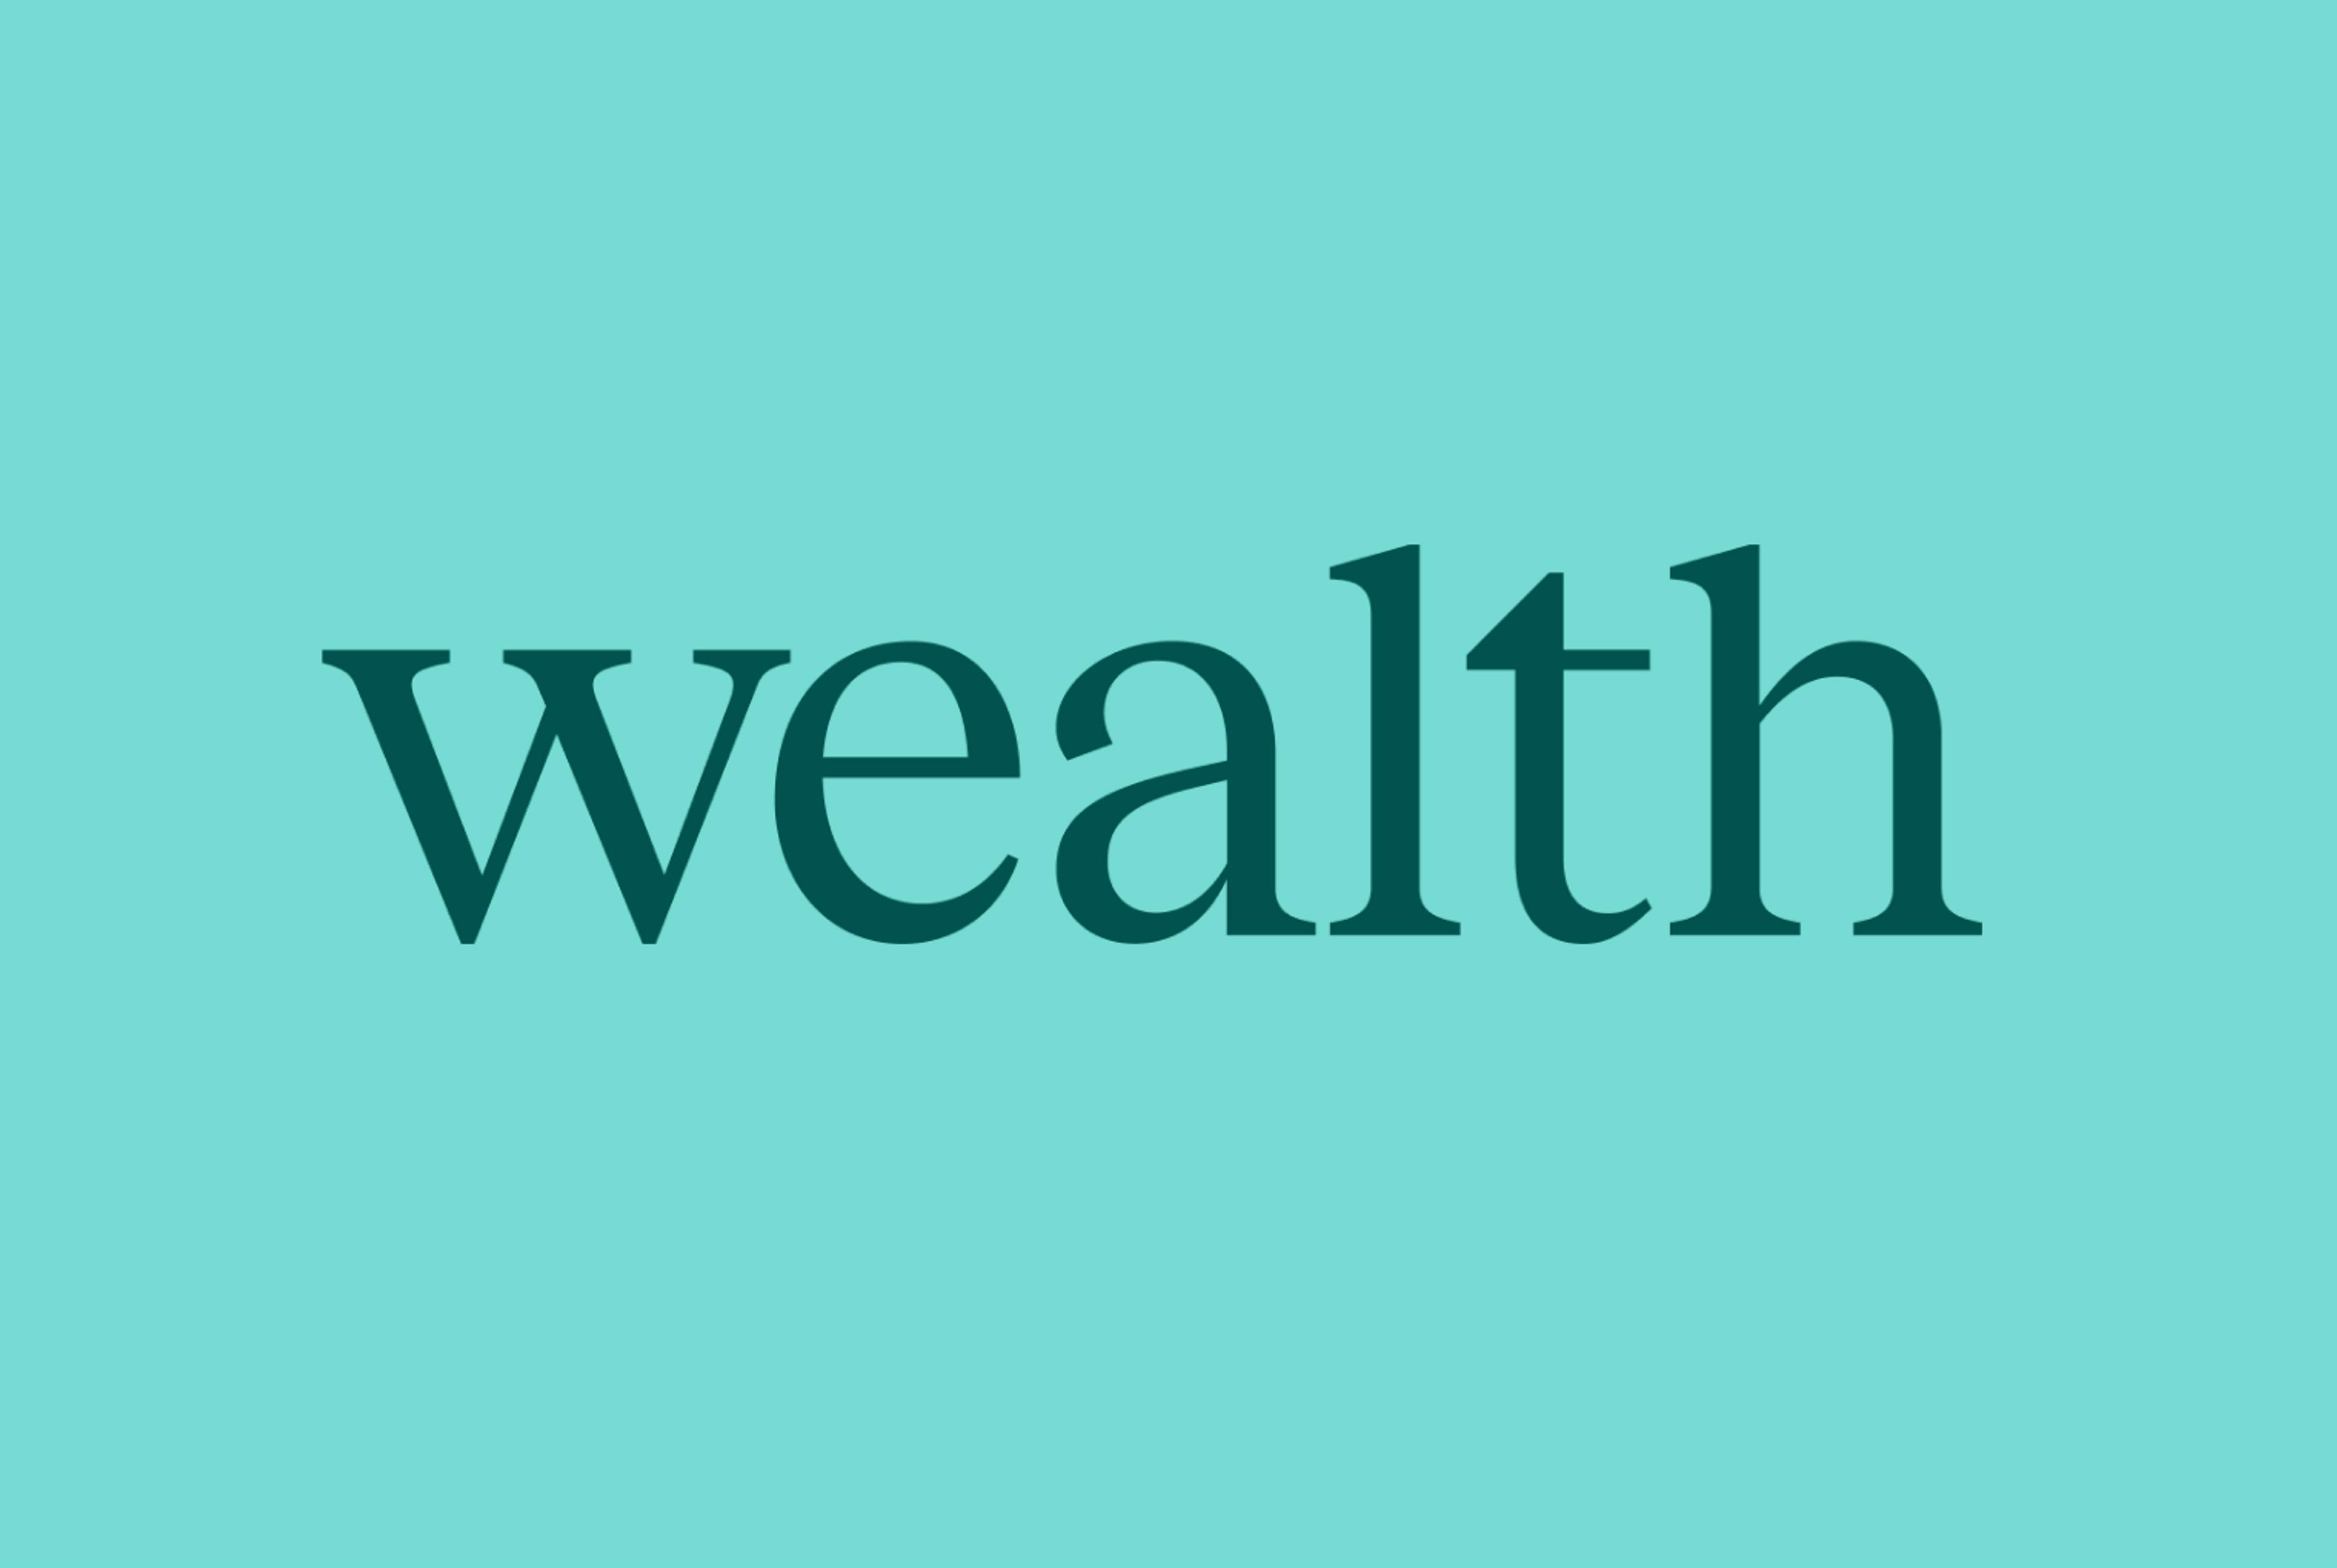 Wealth logo on a turquoise background